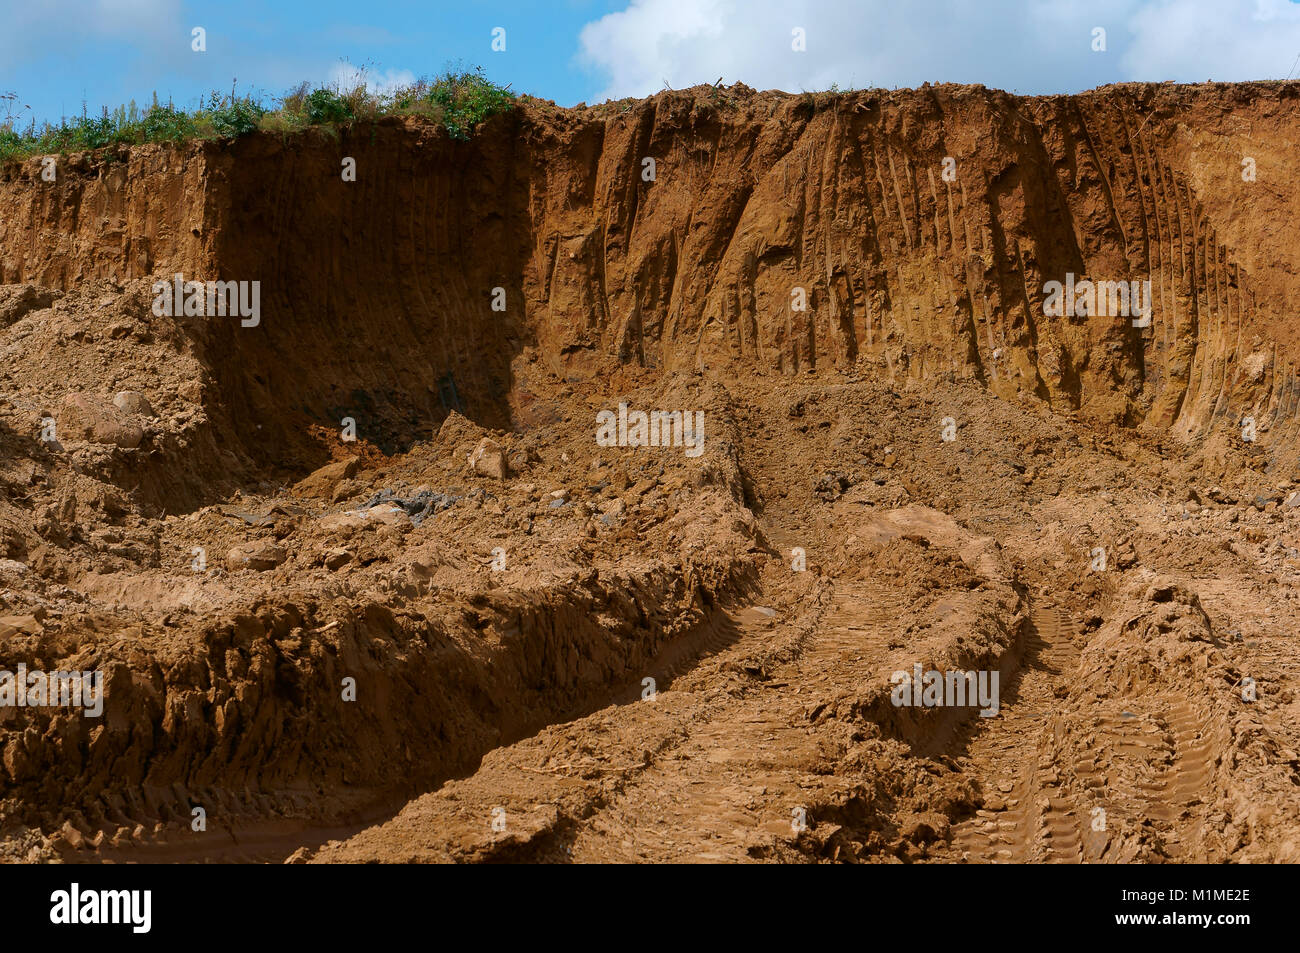 quarry sand, soil disturbance by extraction of minerals Stock Photo